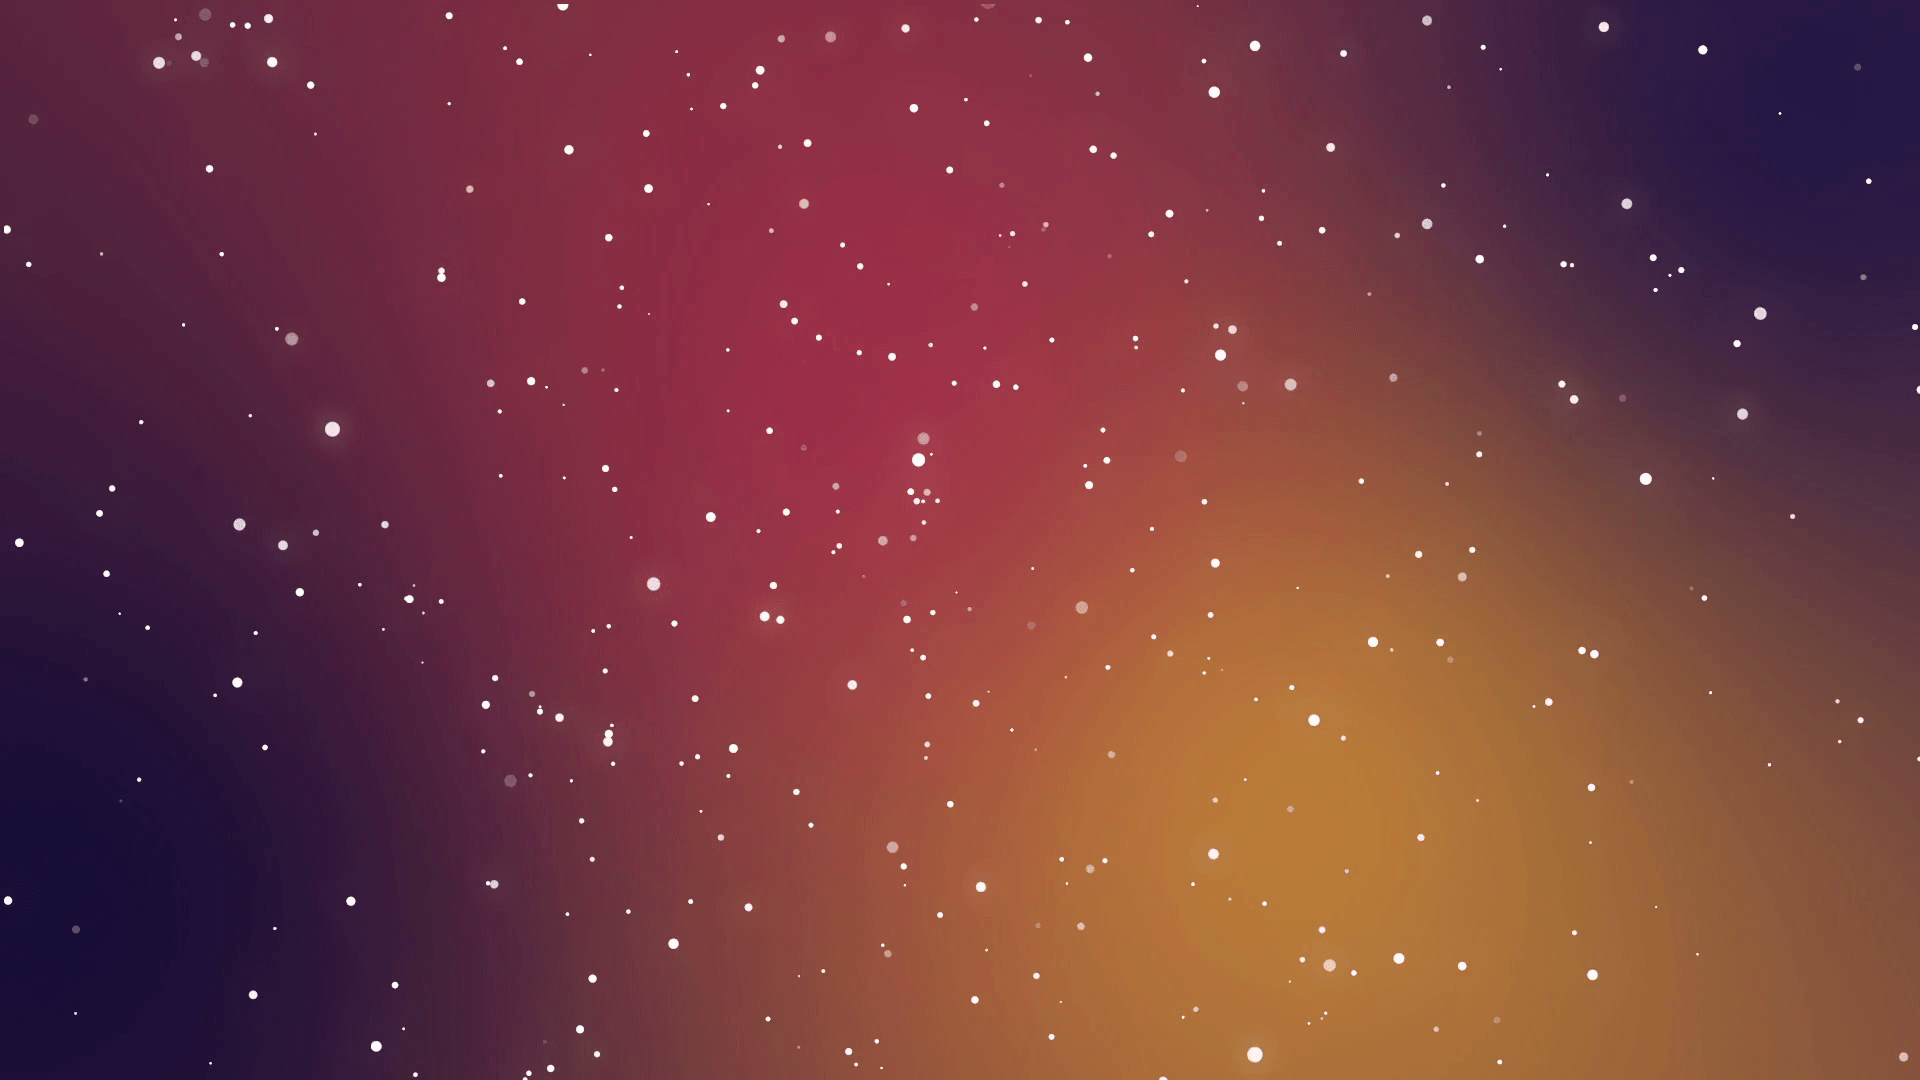 Galaxy animation with shining light particle stars on colorful pink